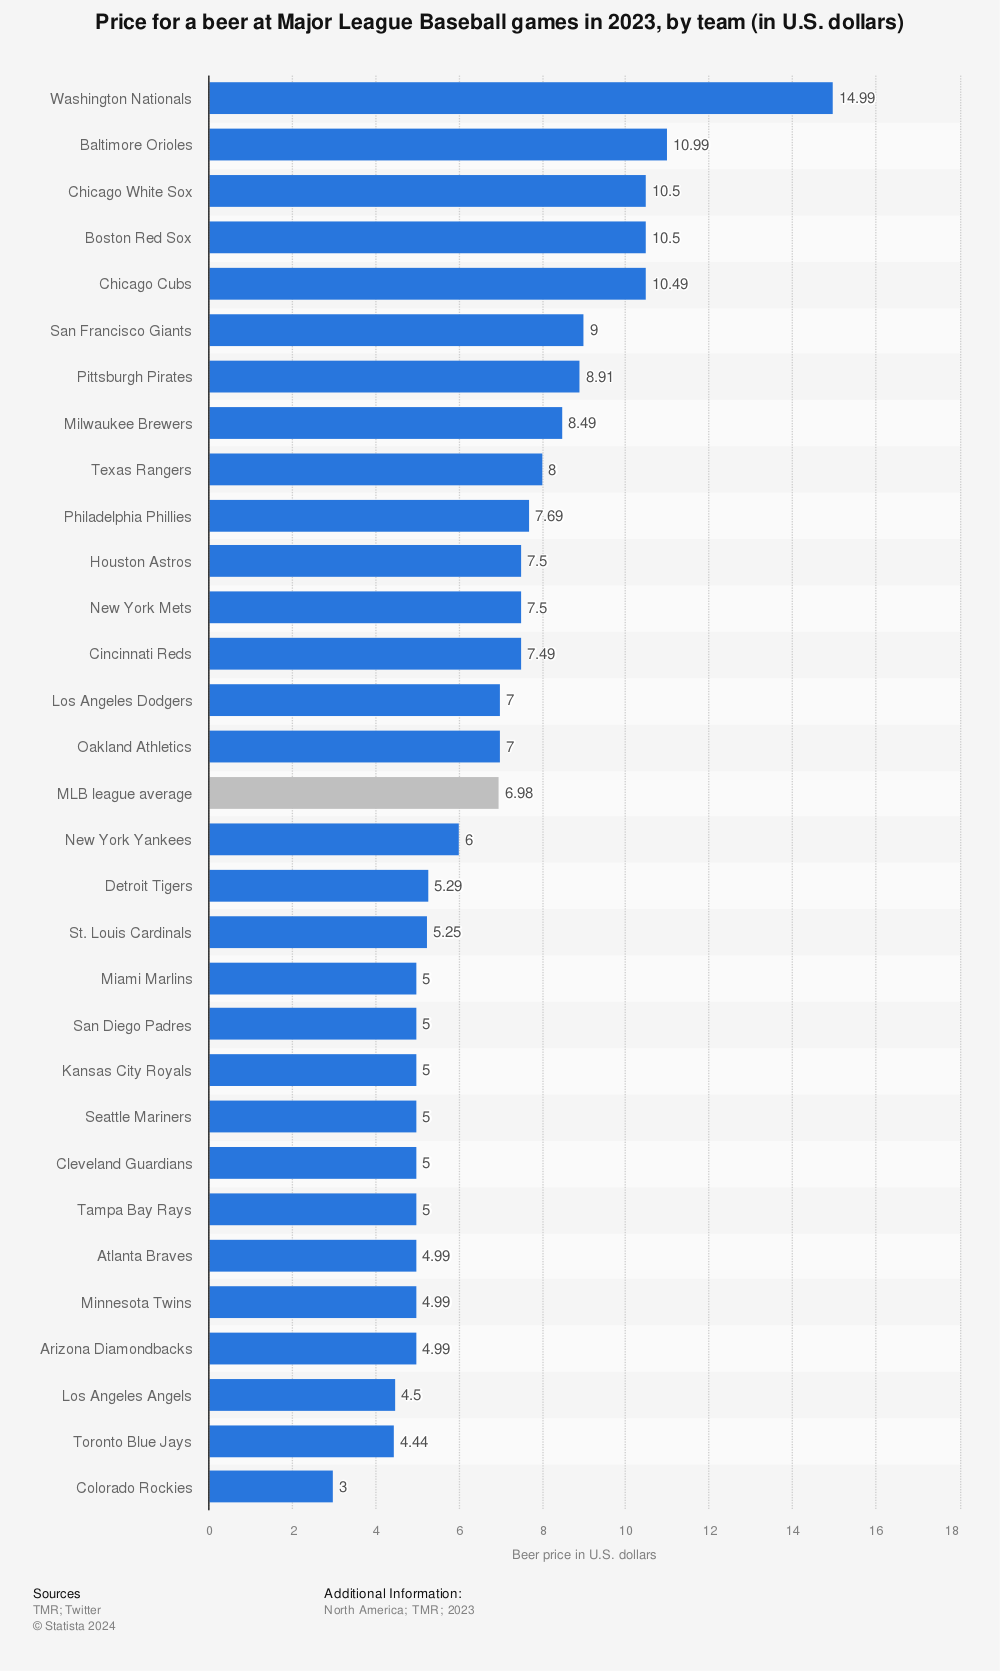 Statistic: Price for a beer* at Major League Baseball games by team in 2019 (in U.S. dollars) | Statista